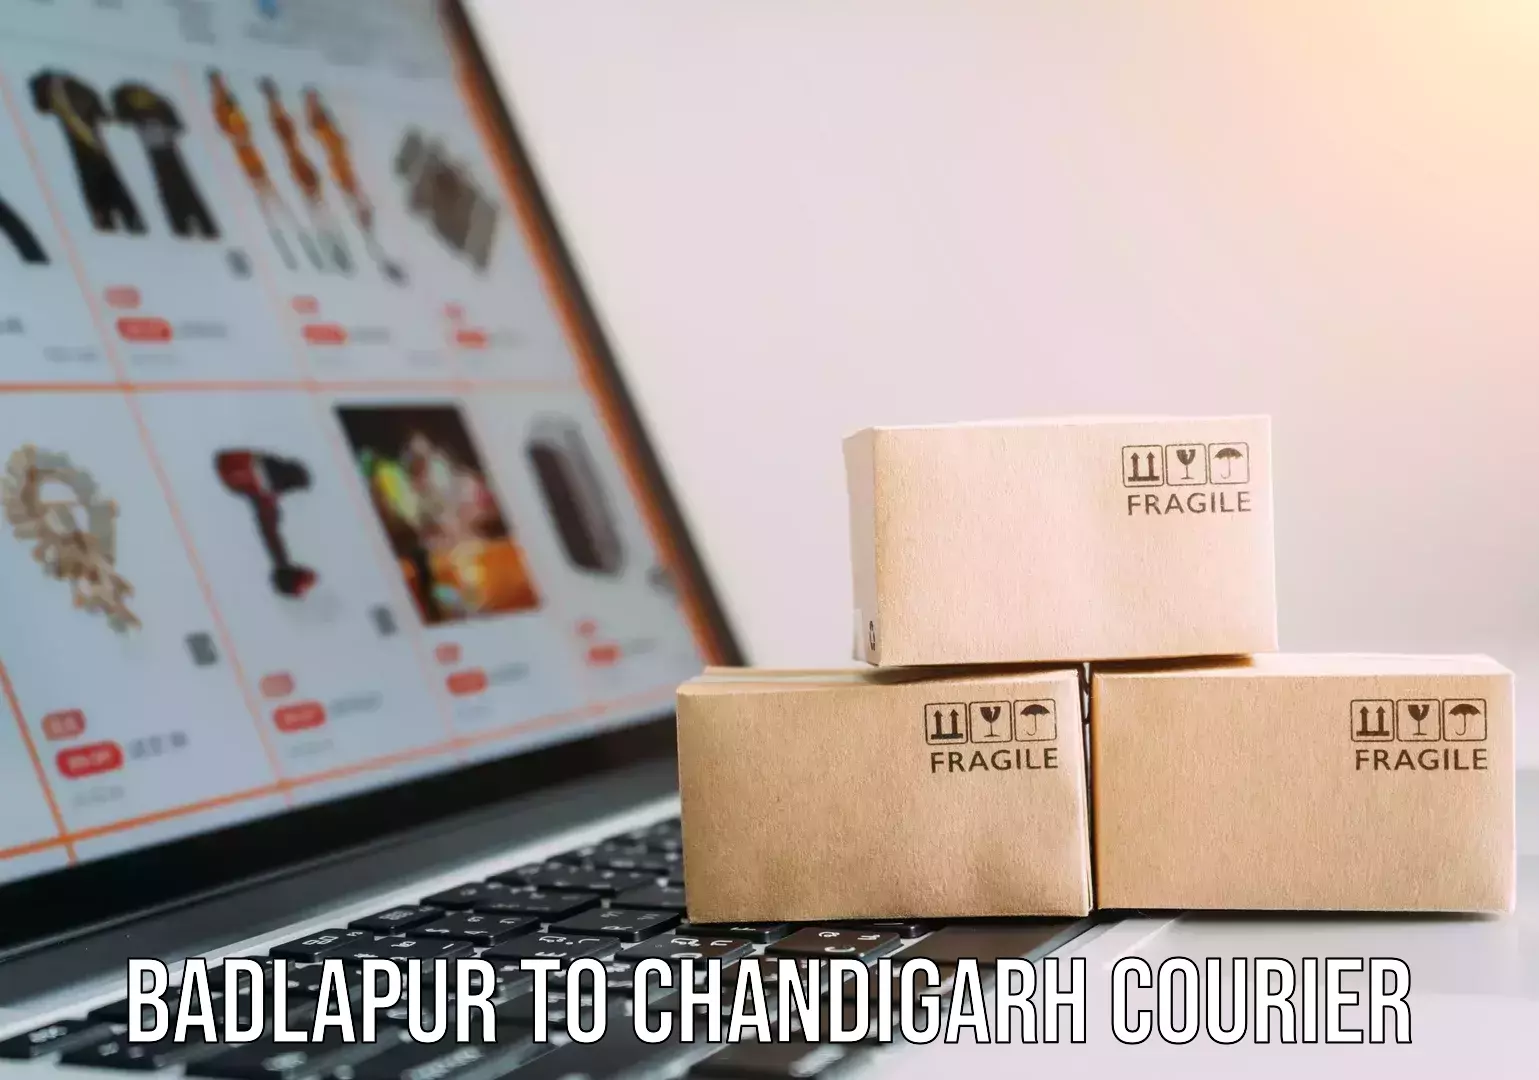 Cash on delivery service Badlapur to Chandigarh